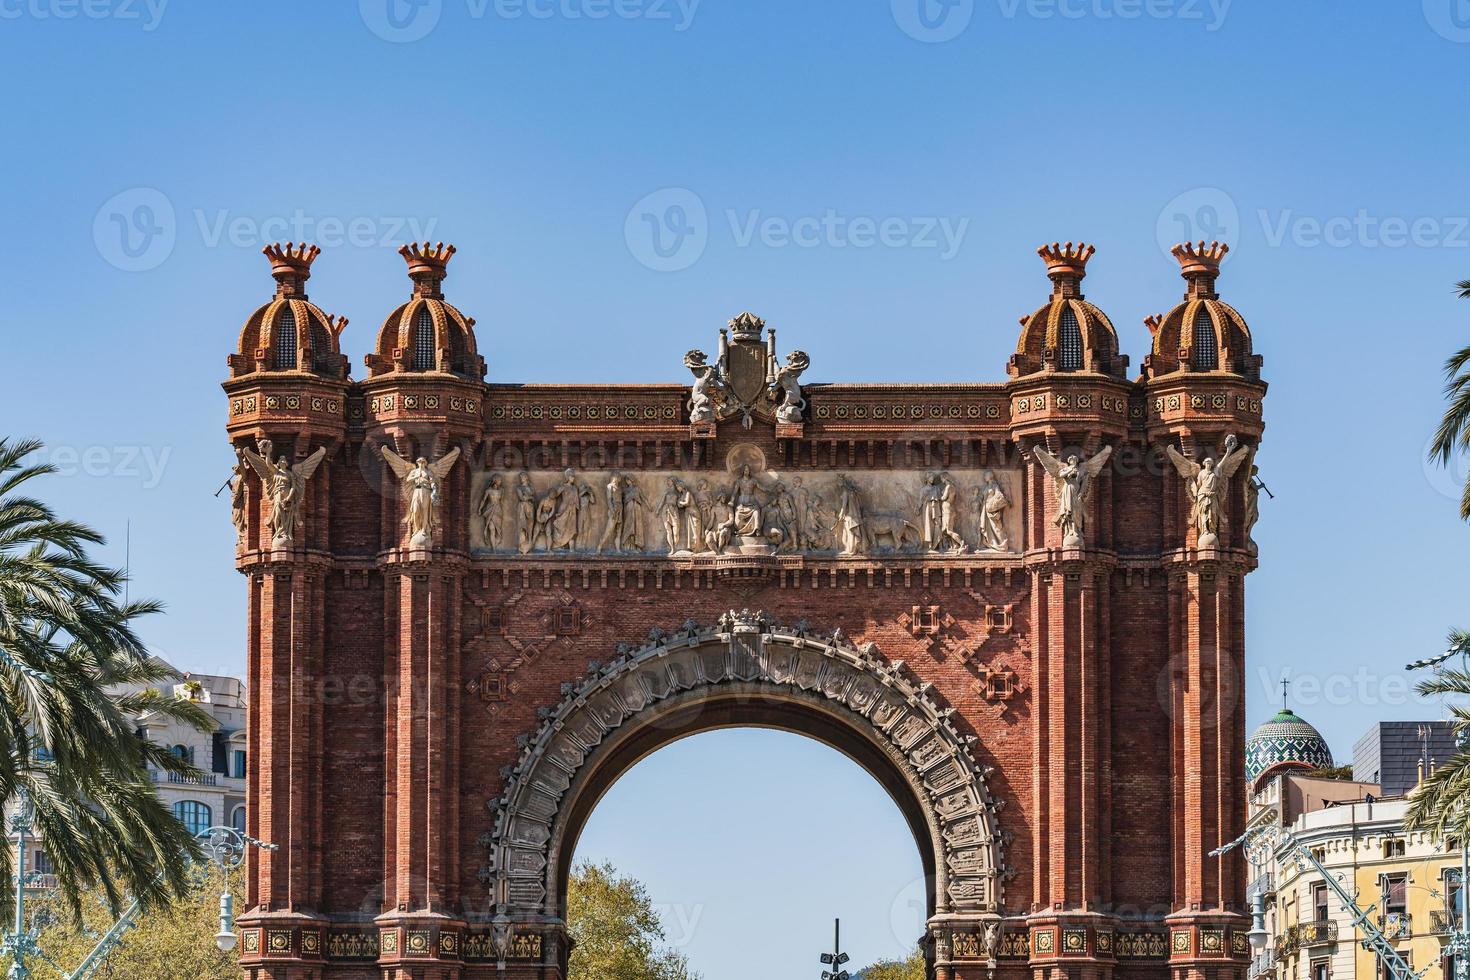 The triumphal arch of Barcelona photo